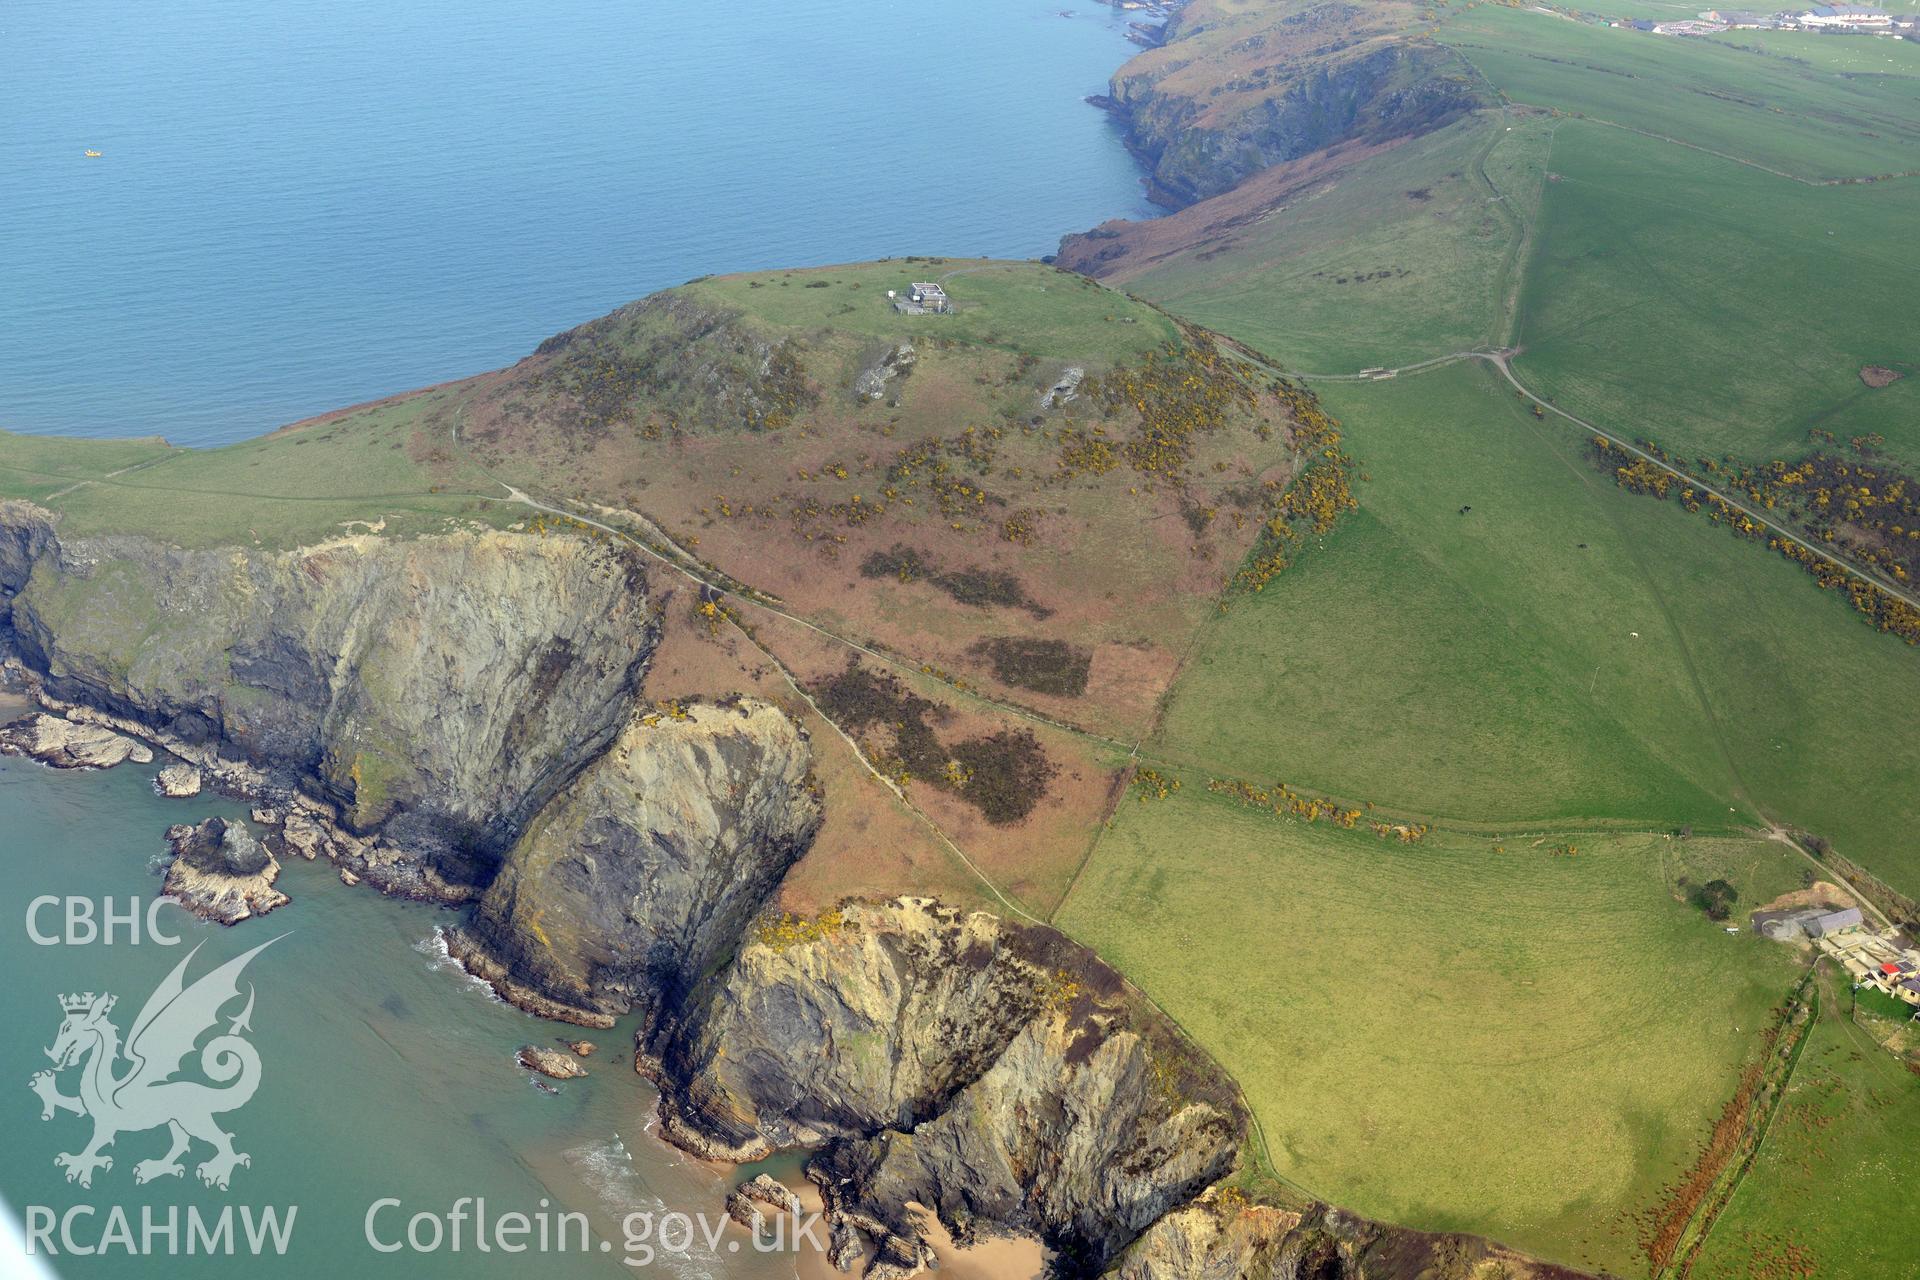 Aerial photography of Pen Dinas Lochtyn taken on 27th March 2017. Baseline aerial reconnaissance survey for the CHERISH Project. ? Crown: CHERISH PROJECT 2019. Produced with EU funds through the Ireland Wales Co-operation Programme 2014-2020. All material made freely available through the Open Government Licence.